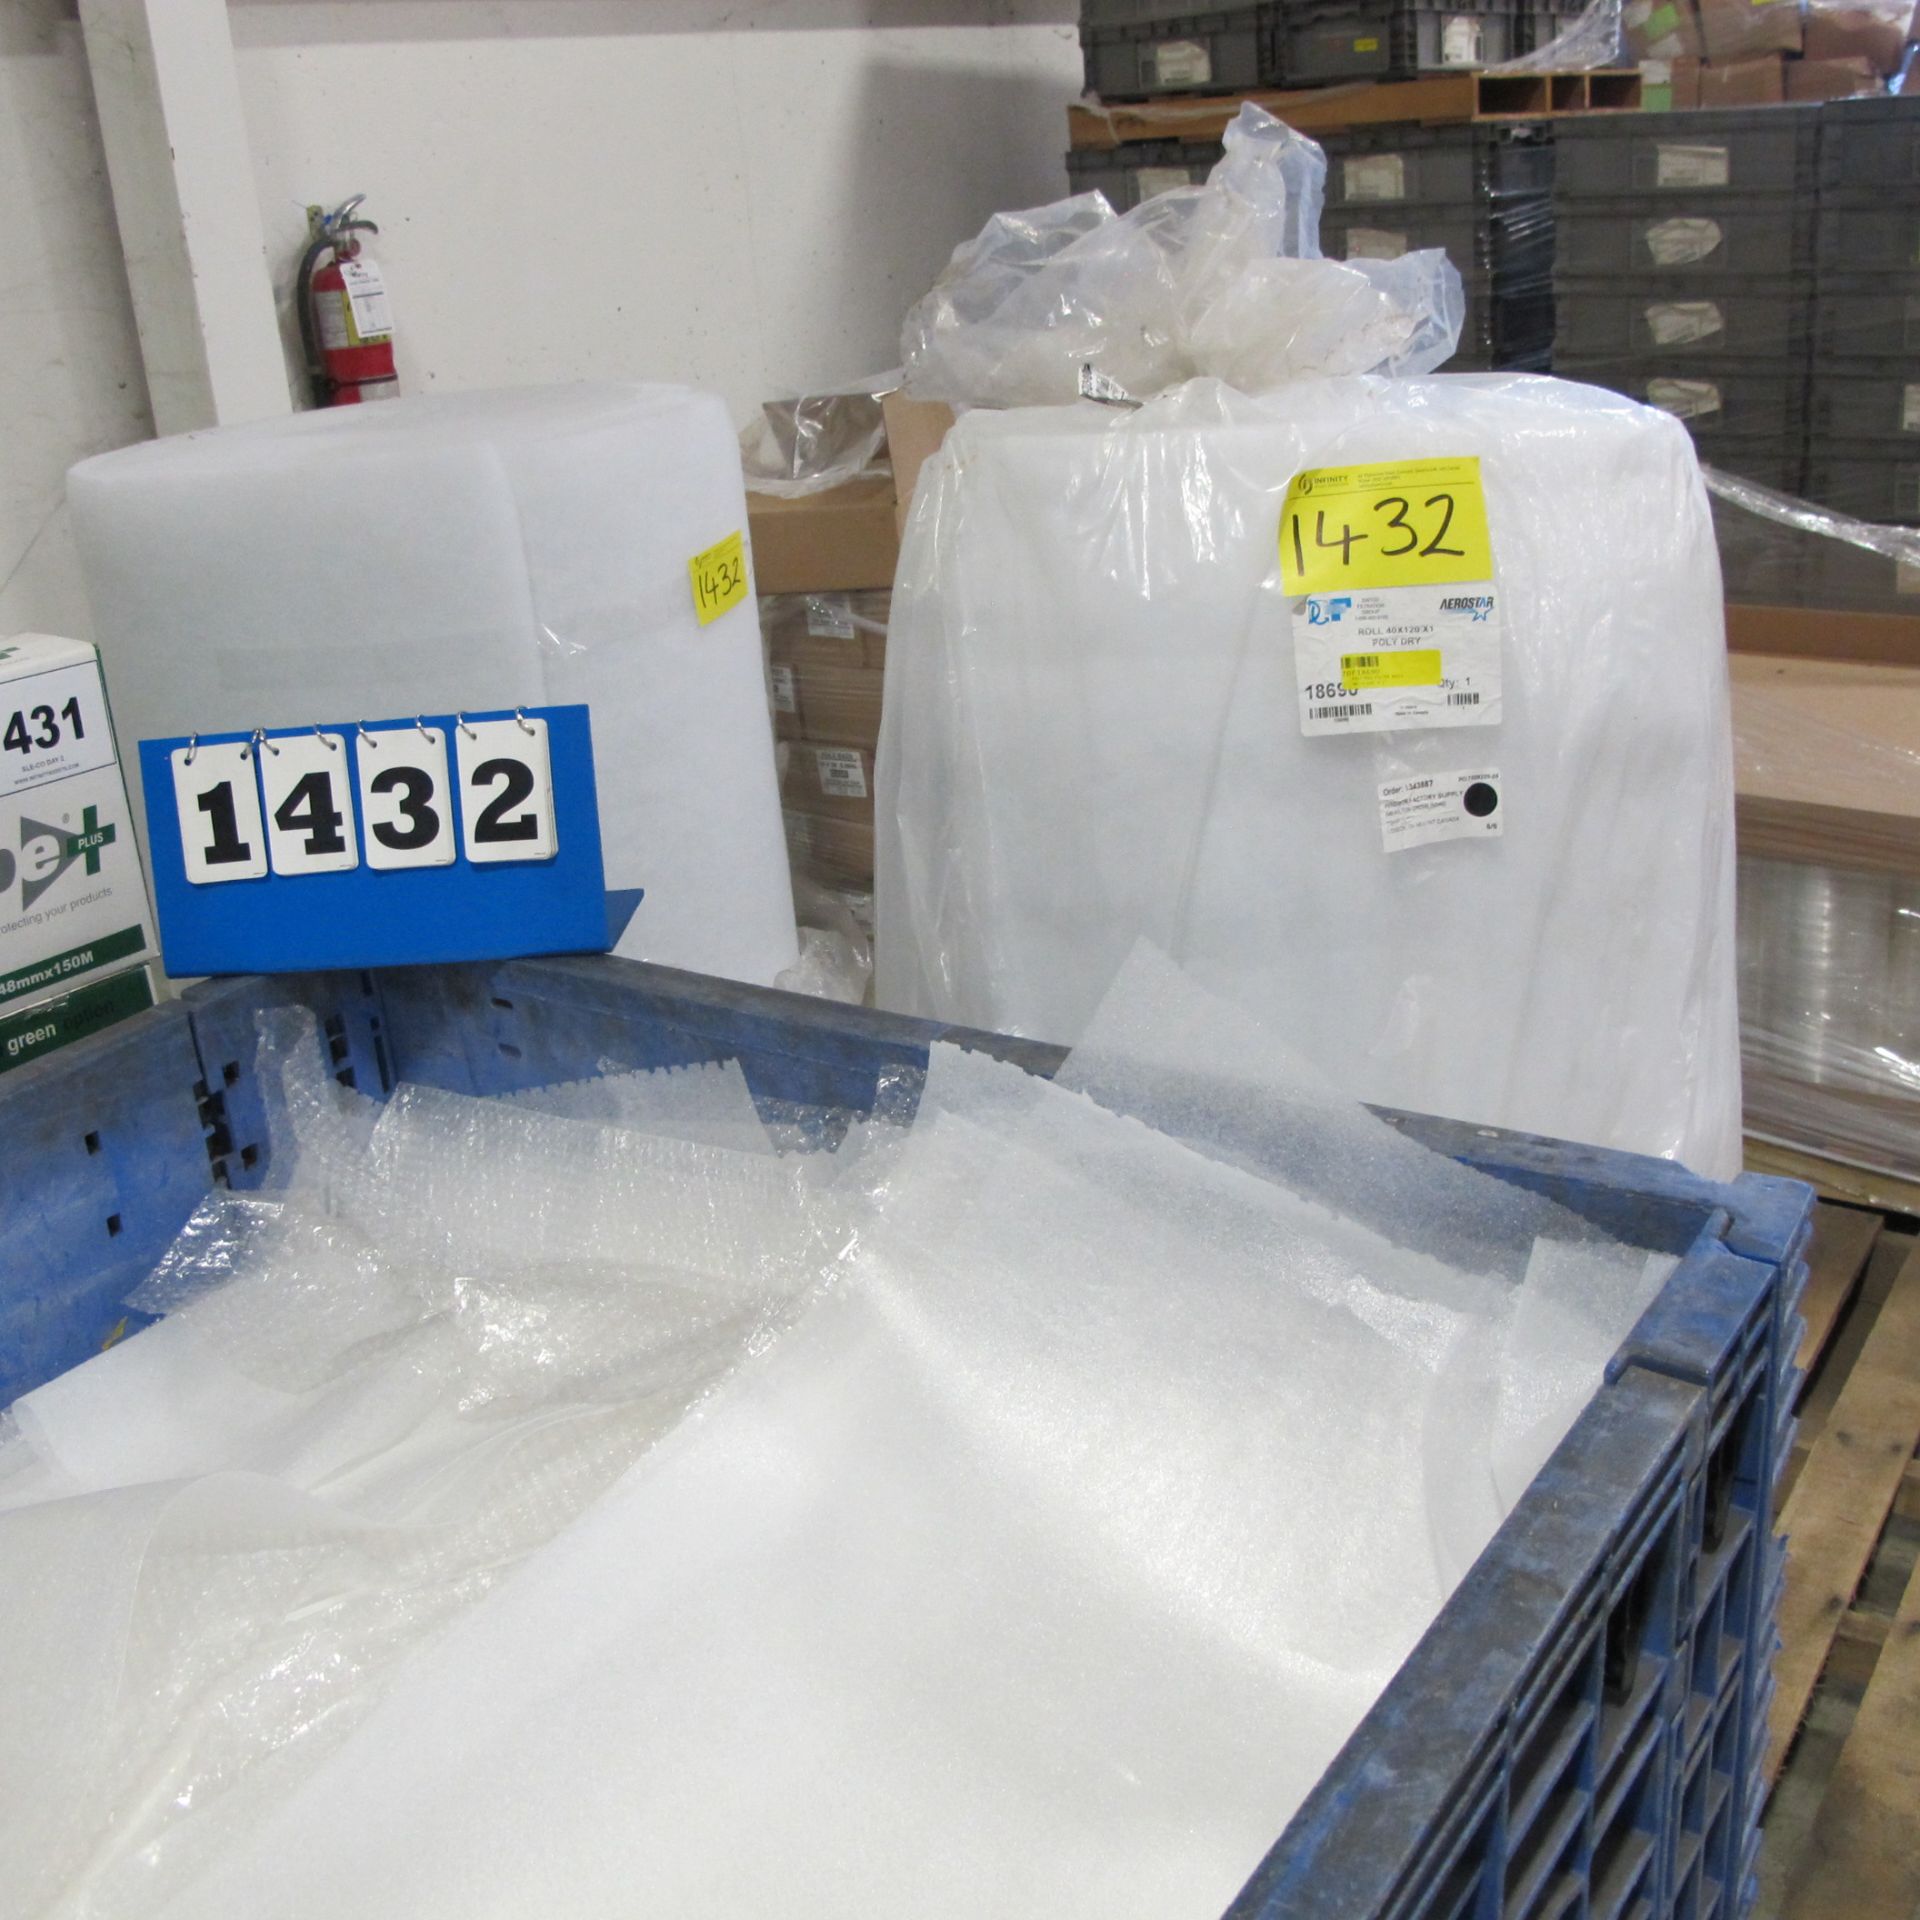 2 PALLETS OF FILTERS (2 ROLLS) AND PLASTIC TOTE OF WRAPPING MATERIAL